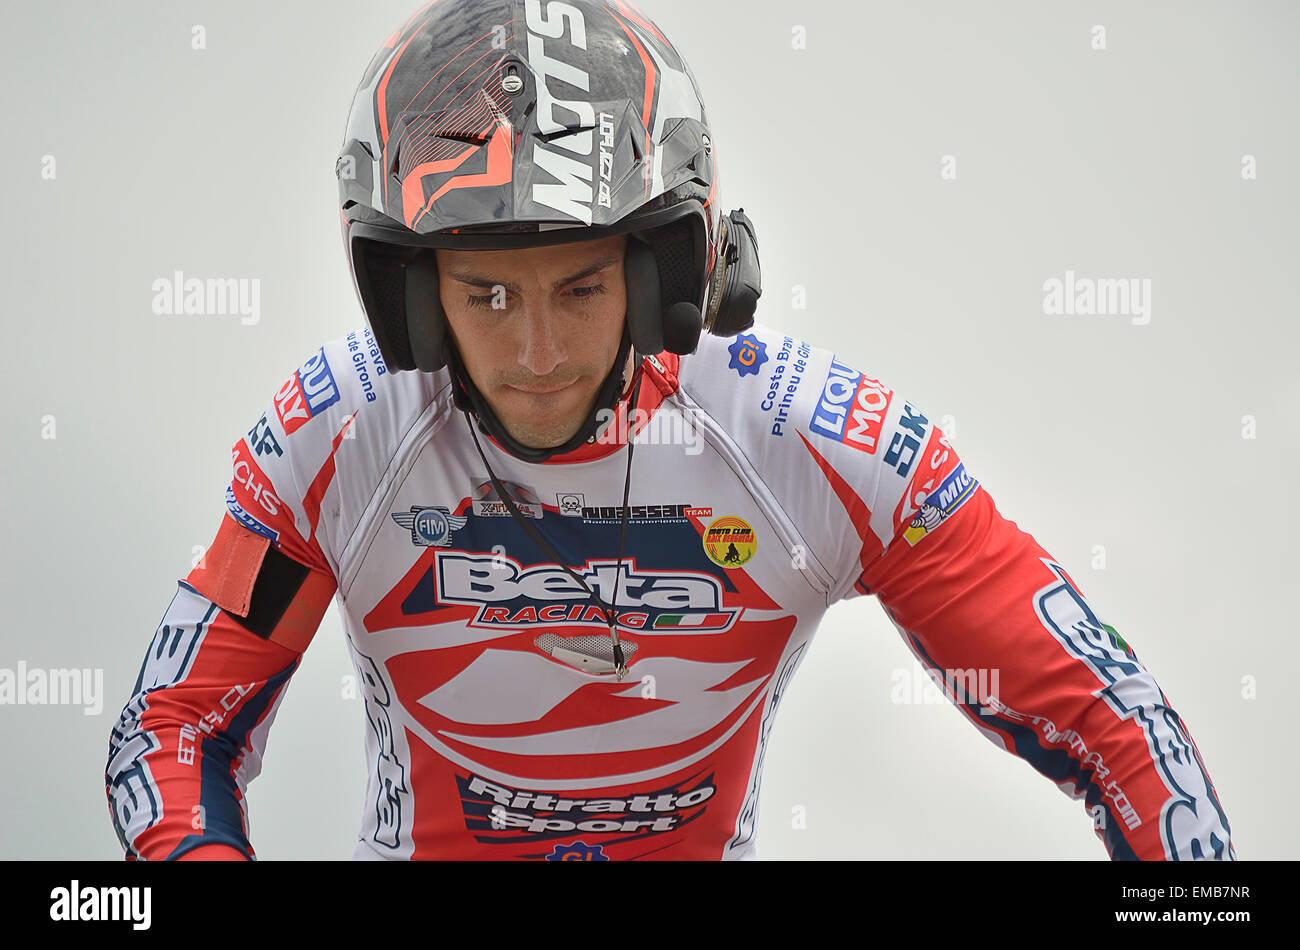 Spain trial championship. Portrait of Jeroni Fajardo over his motorcycle. He finished in 2nd position (TR1). Stock Photo